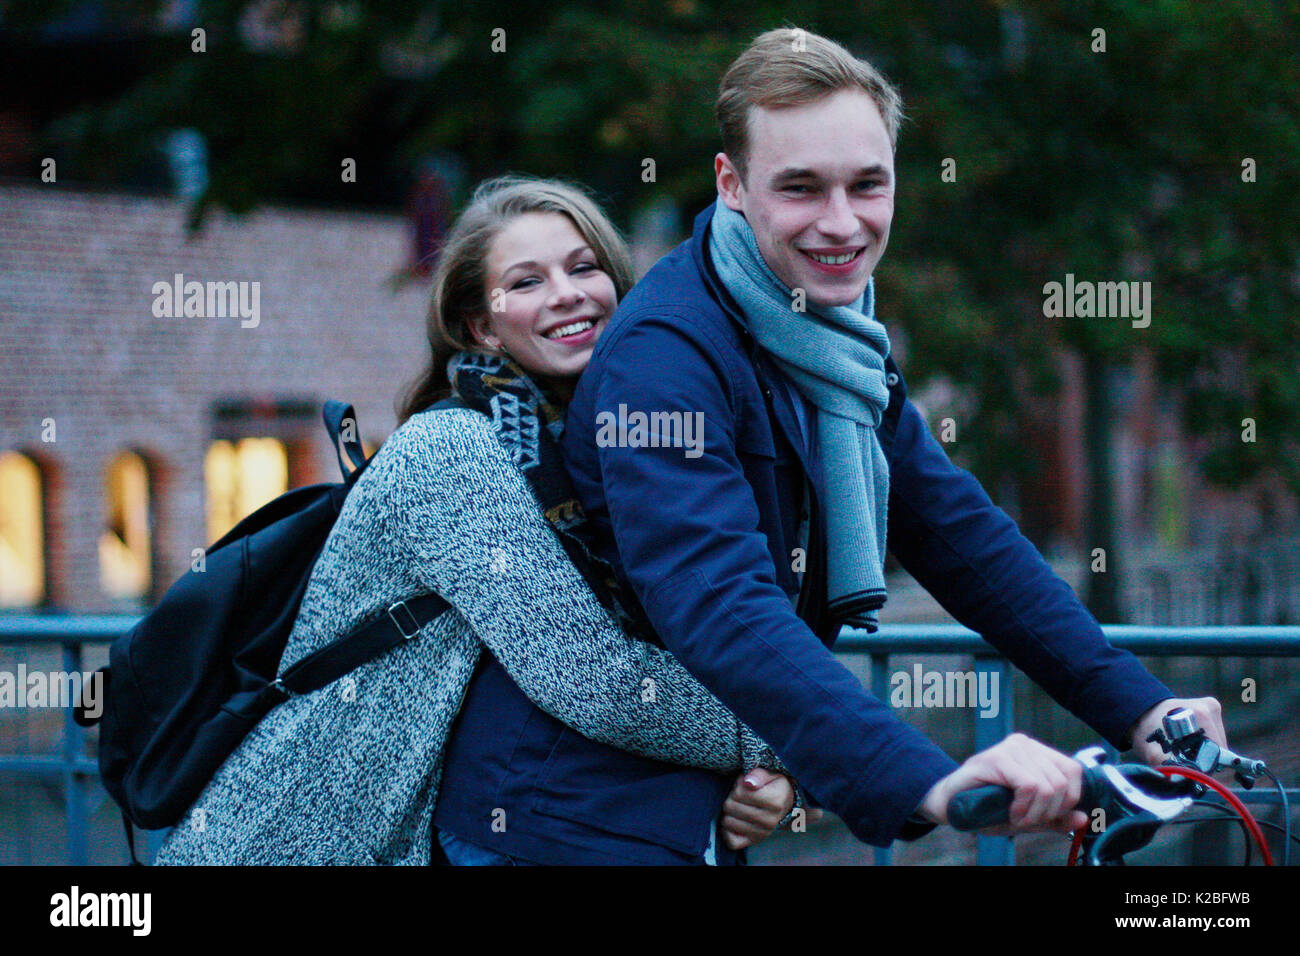 Youthful couple on a bicycle Stock Photo